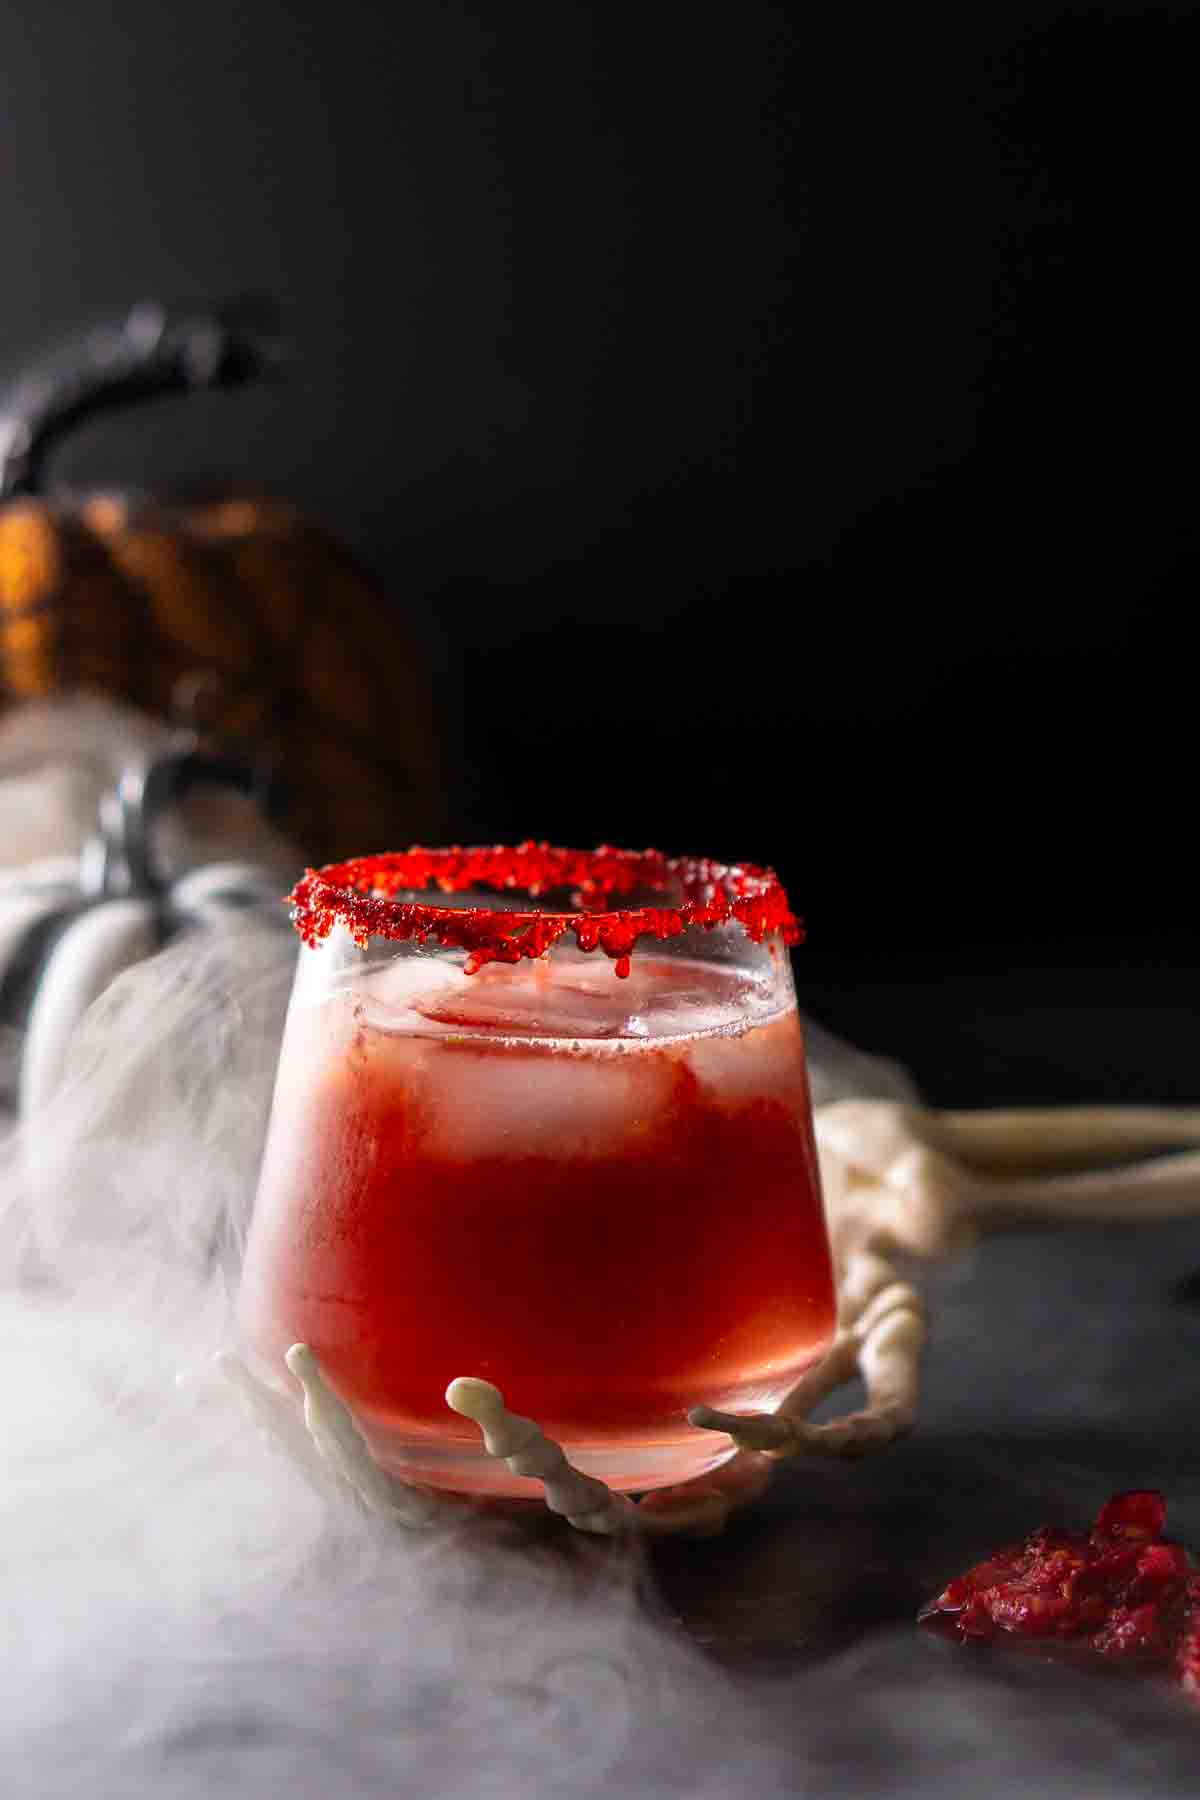 A Zombie Brains Halloween Cocktail against a black surface with a cloud of mist coming in from the left.